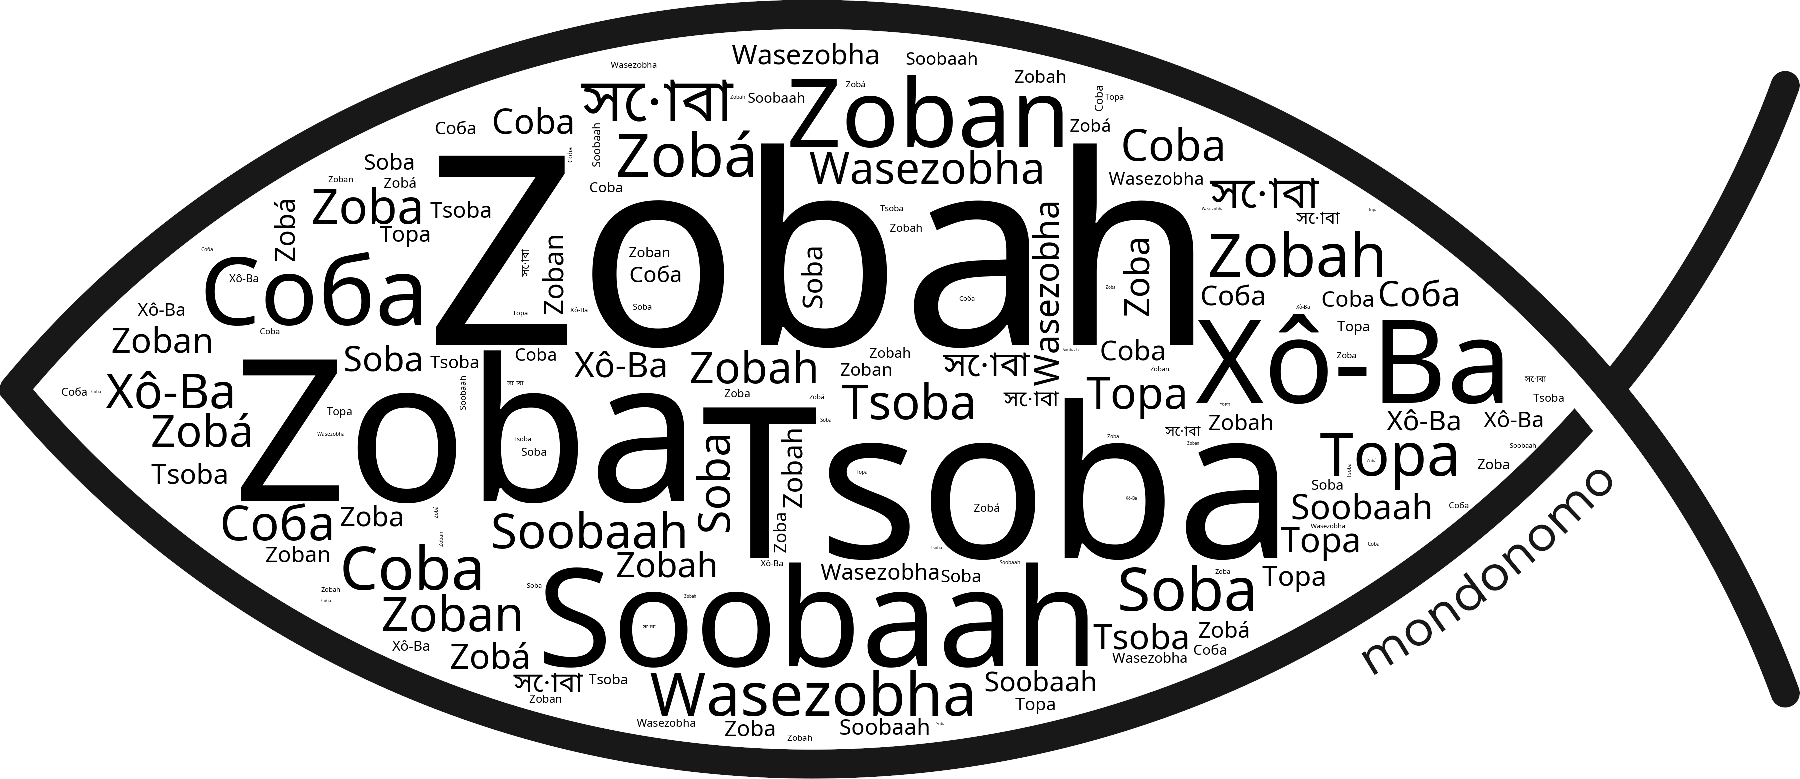 Name Zobah in the world's Bibles